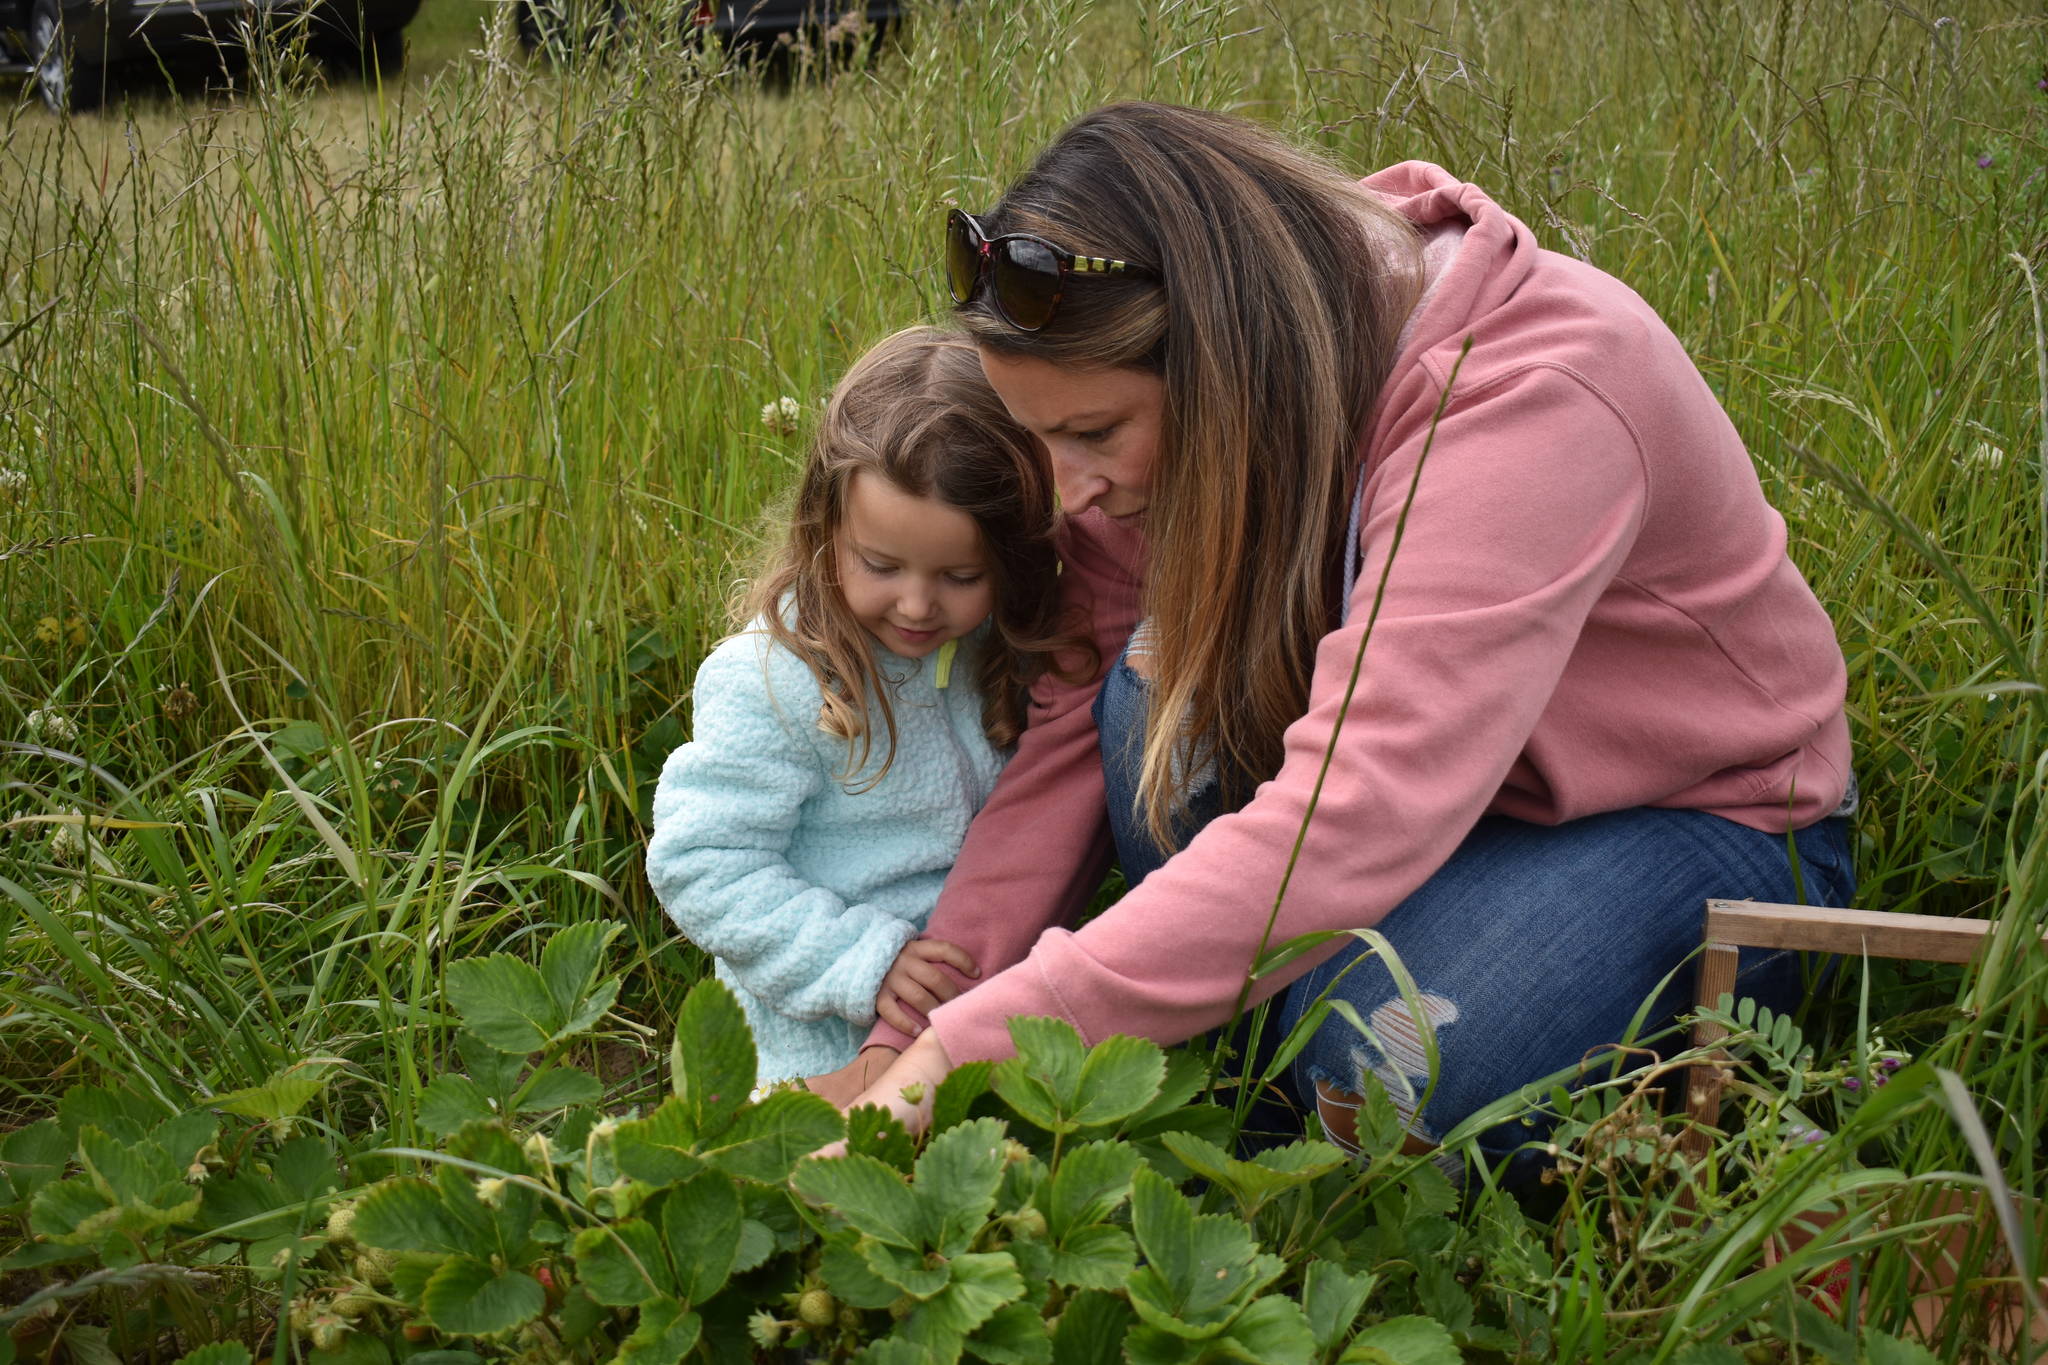 Photo by Emily Gilbert/Whidbey News-Times
Vera Easton, 4, with mother Maggie on the first day of U-pick strawberries at Bell's Farm near Coupeville.